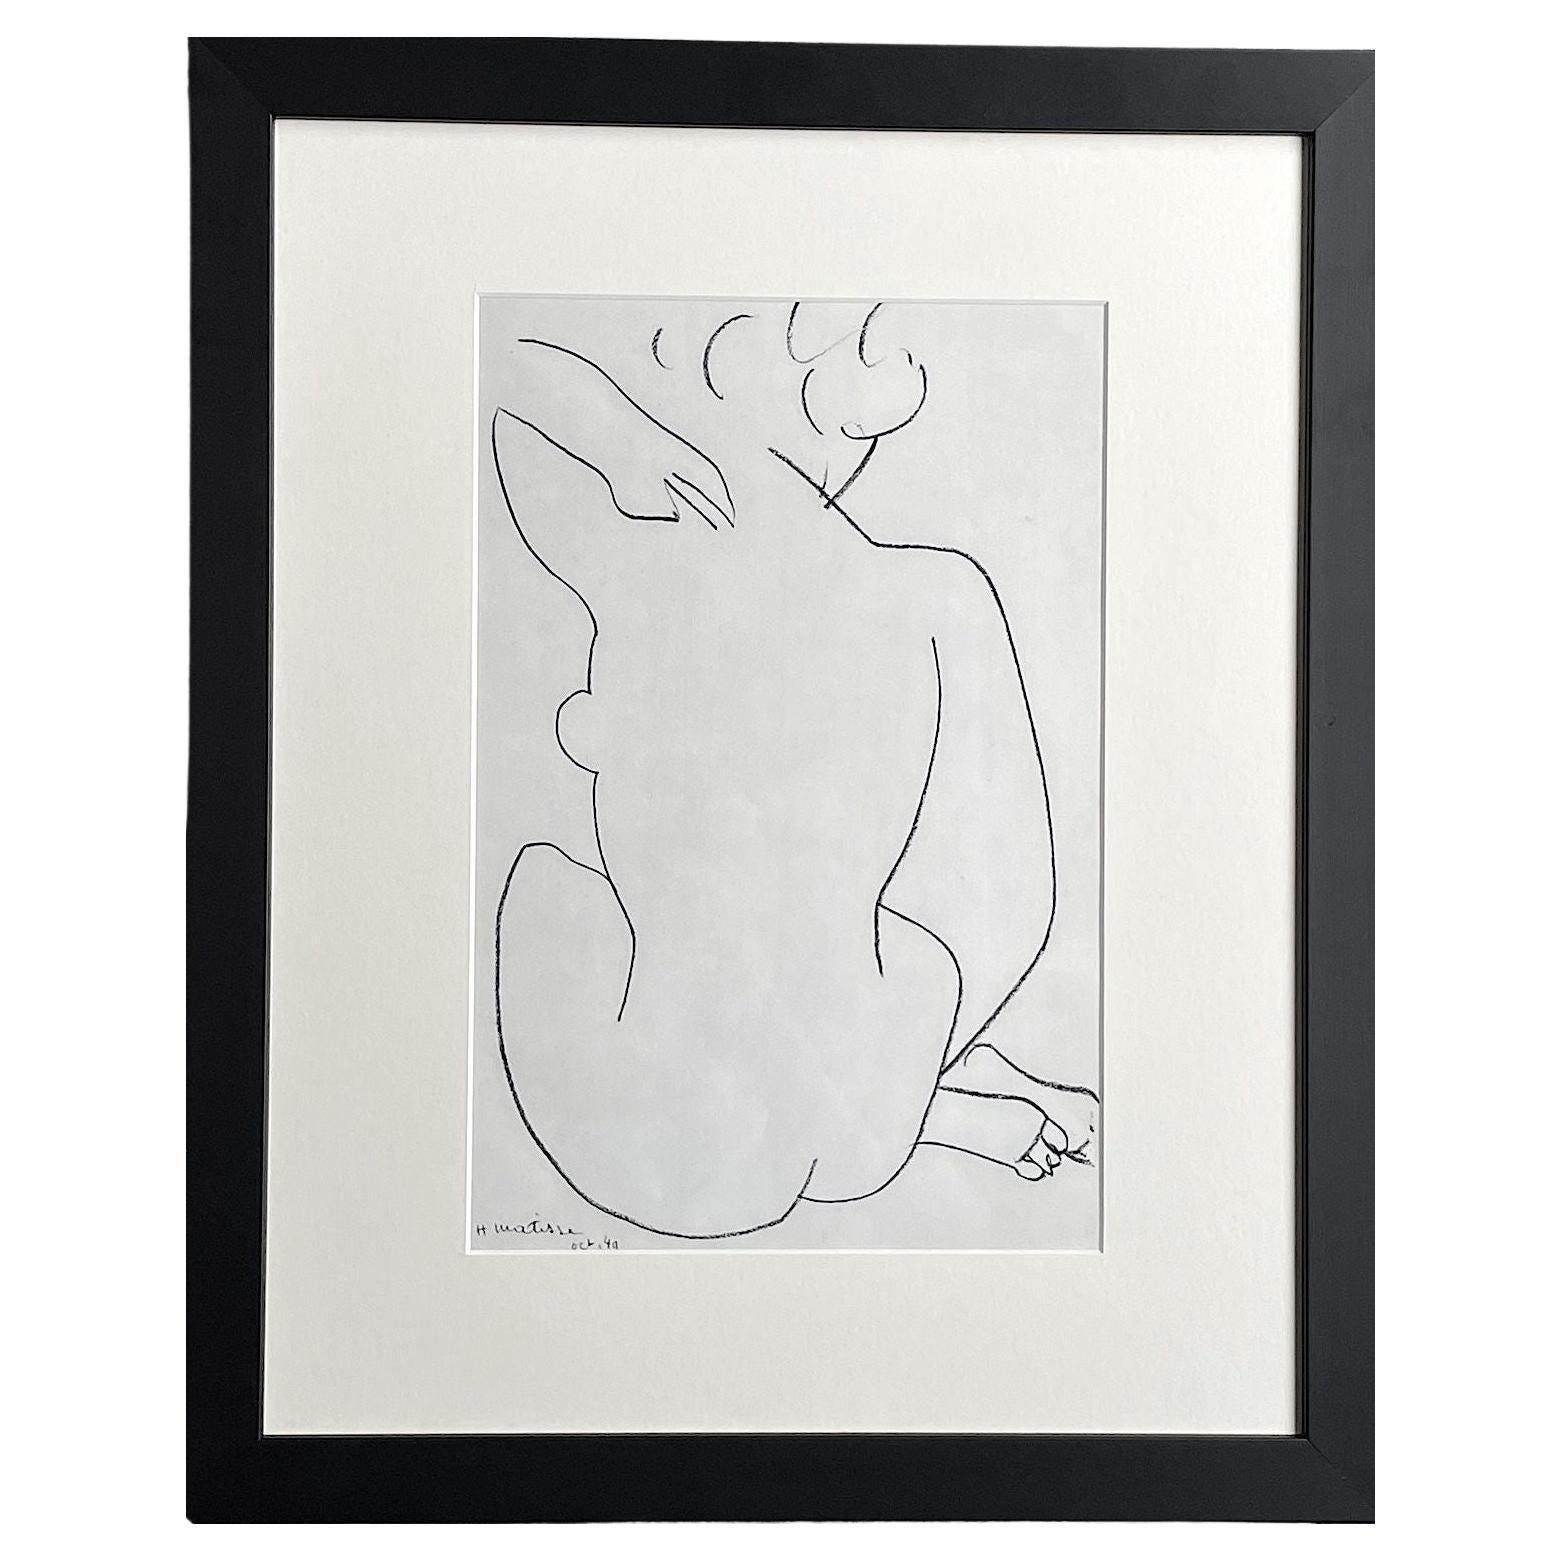 Henri Matisse "Nude" Lithograph Printed in 1954 by Mourlot Freres Presses, Paris For Sale